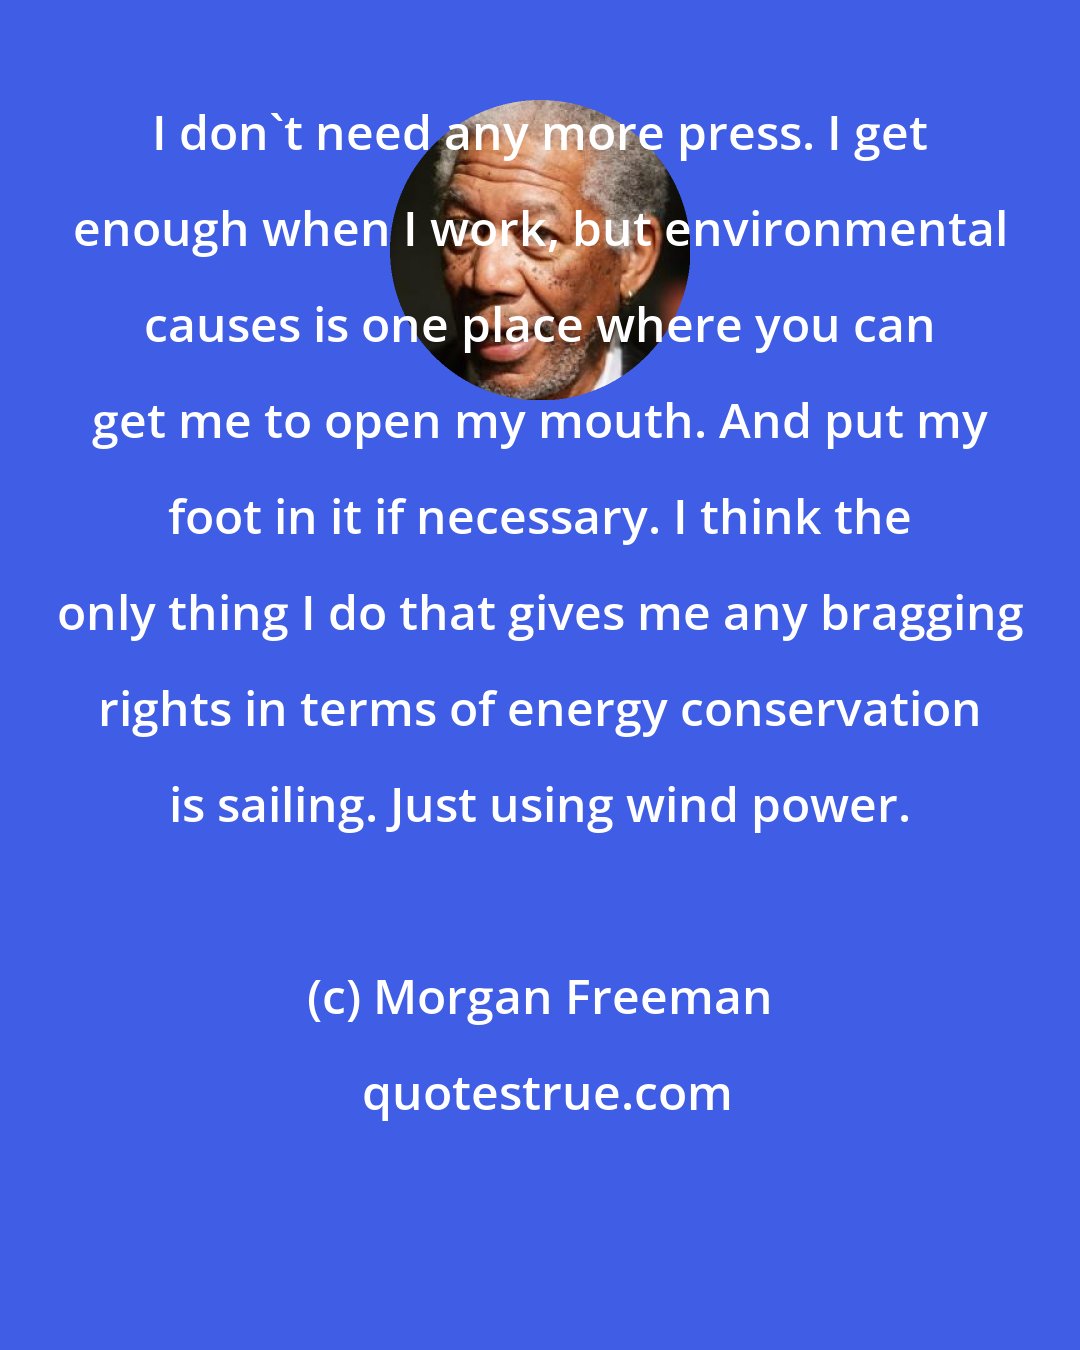 Morgan Freeman: I don't need any more press. I get enough when I work, but environmental causes is one place where you can get me to open my mouth. And put my foot in it if necessary. I think the only thing I do that gives me any bragging rights in terms of energy conservation is sailing. Just using wind power.